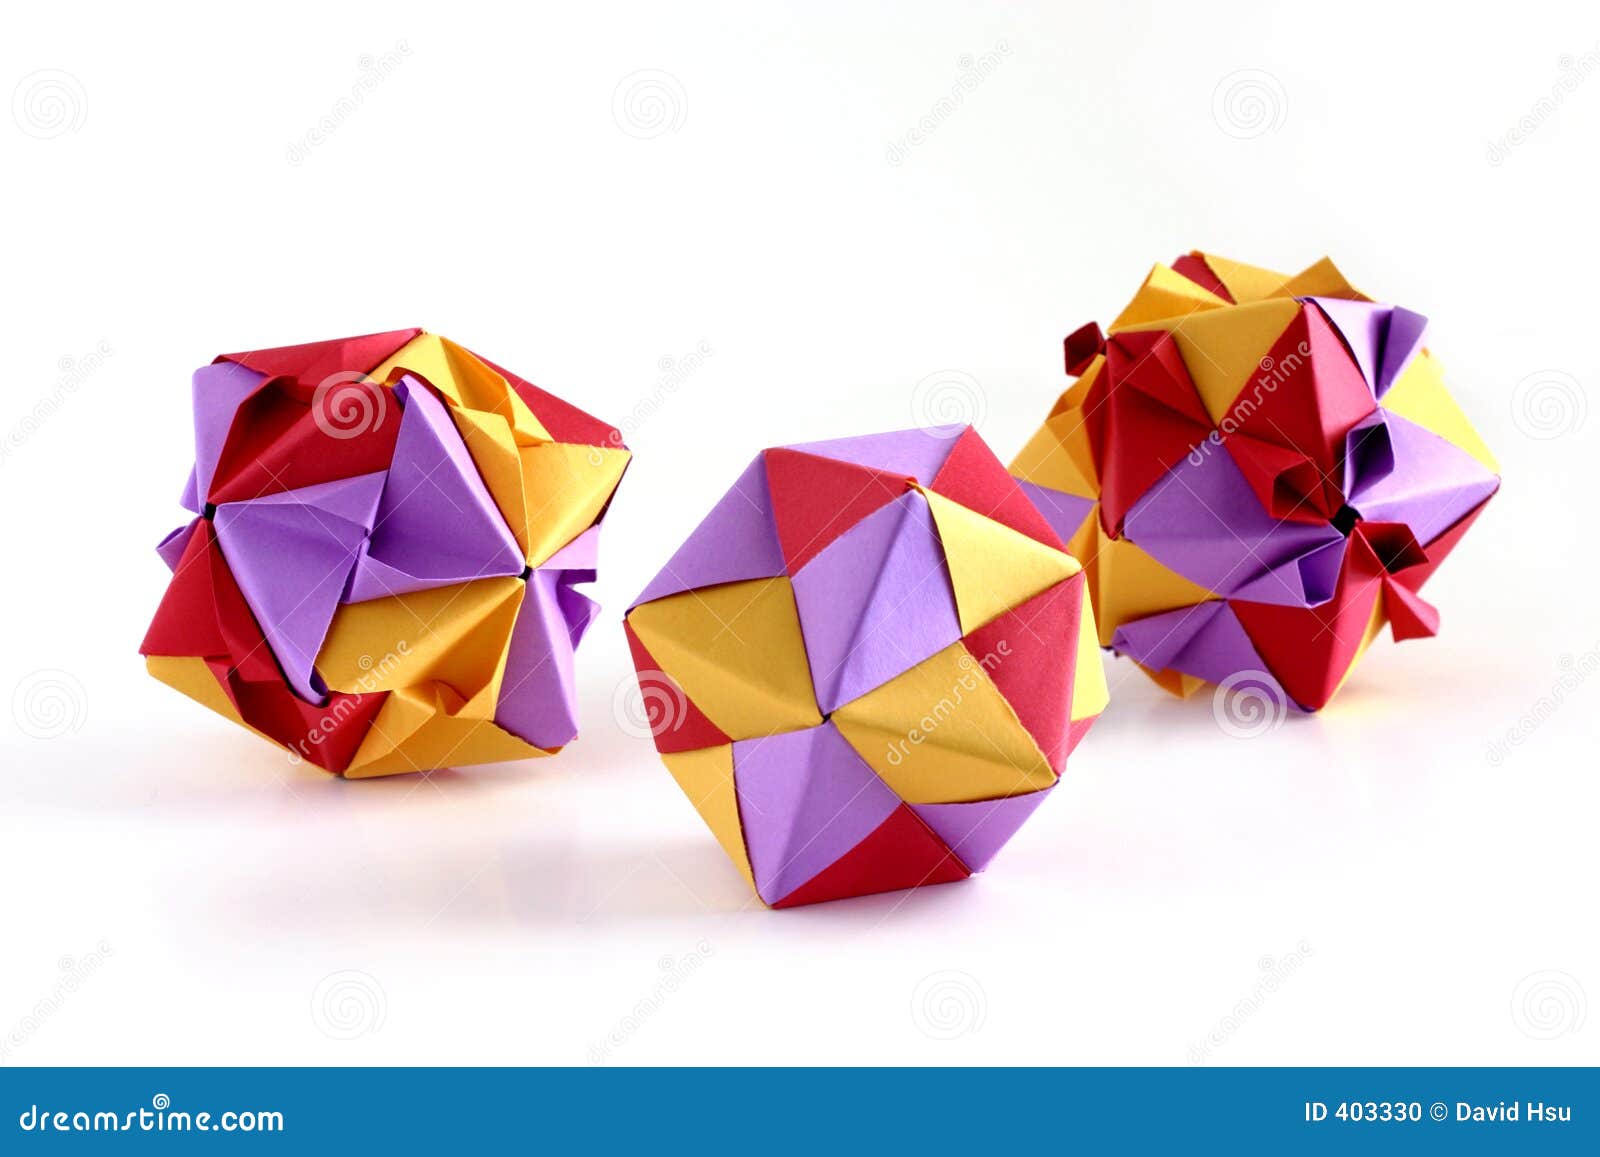 Origami Sets